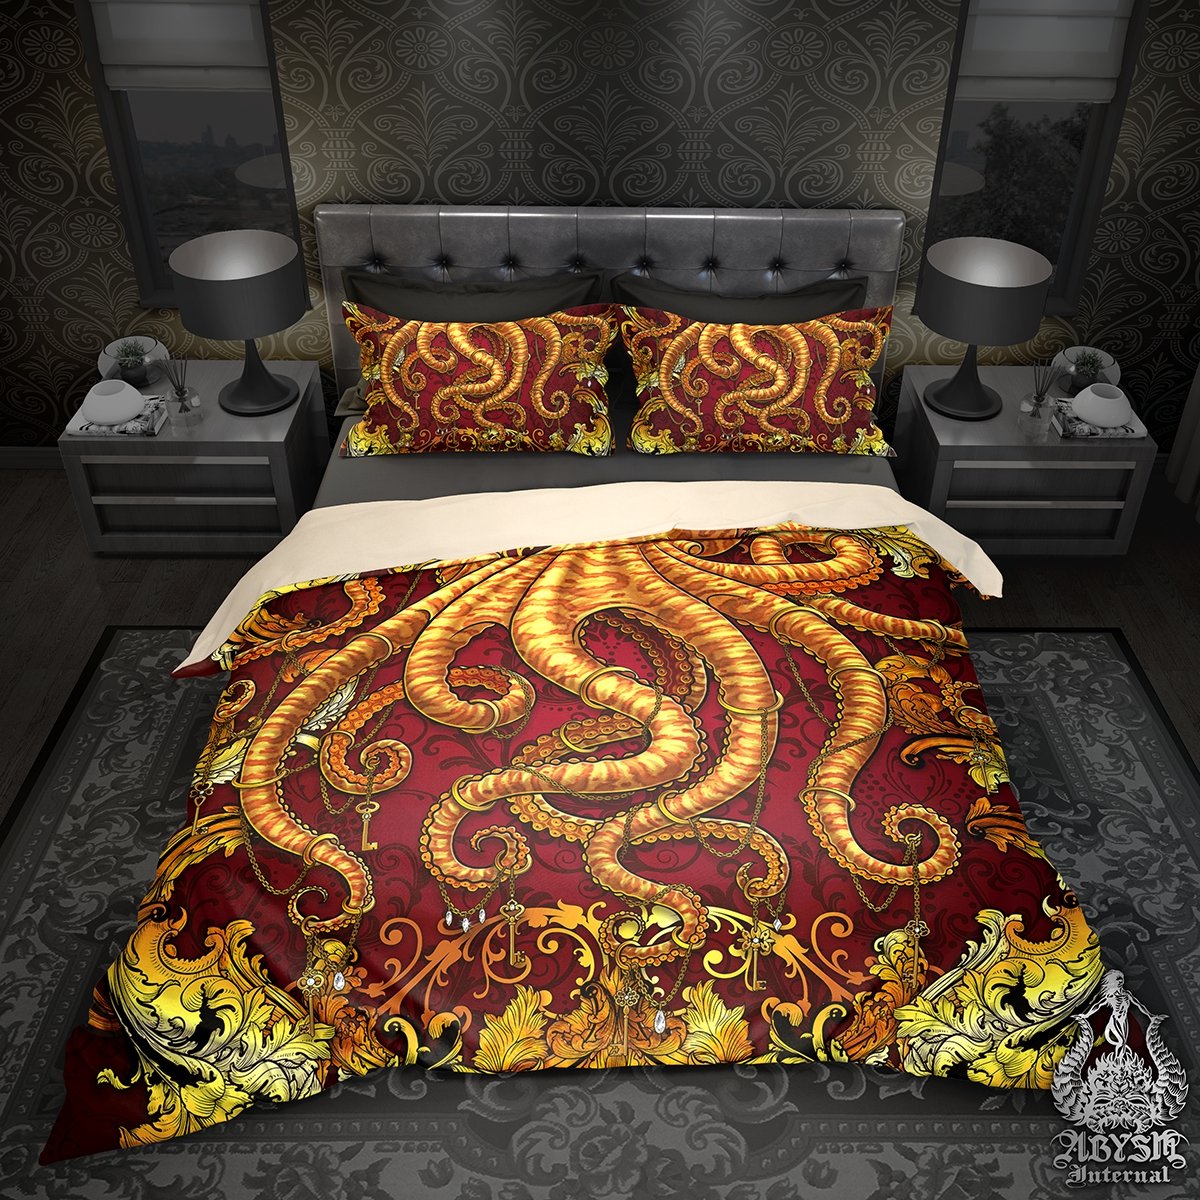 Octopus Bedding Set, Comforter and Duvet, Alternative Bed Cover, Coastal Bedroom Decor, King, Queen and Twin Size - Gold and Red - Abysm Internal